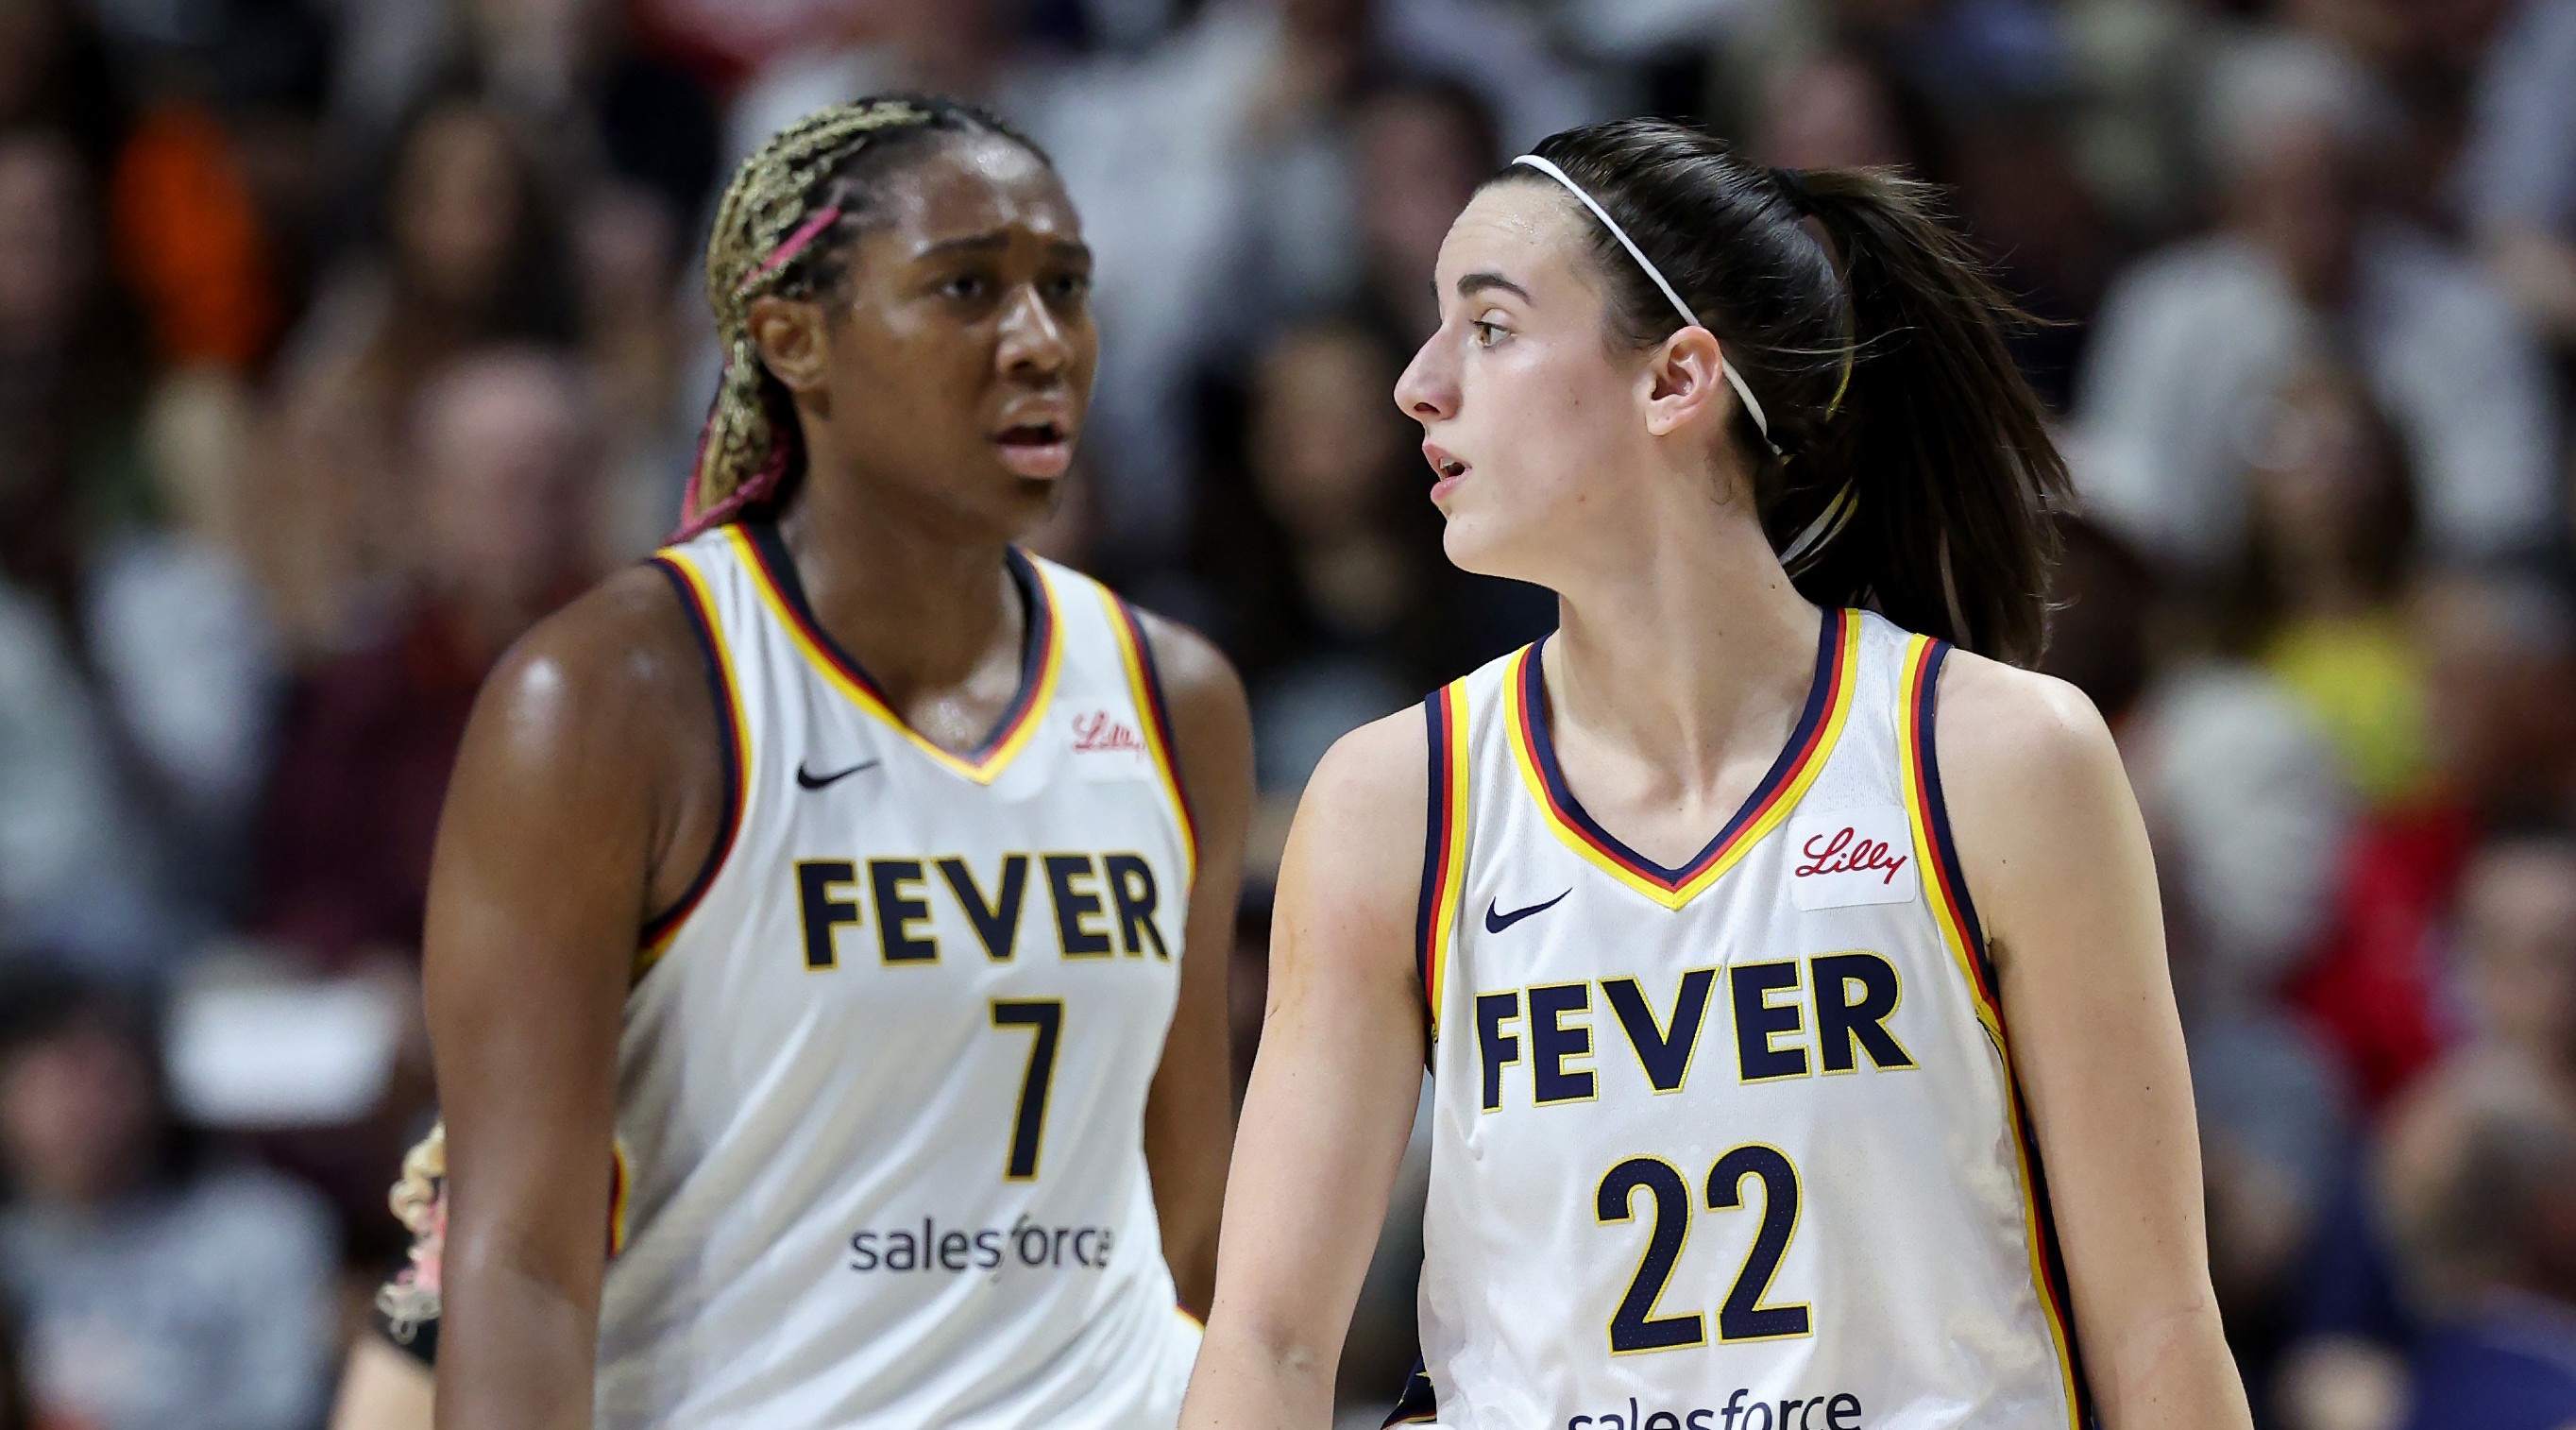 Clark, Fever ‘Going to Take Time’